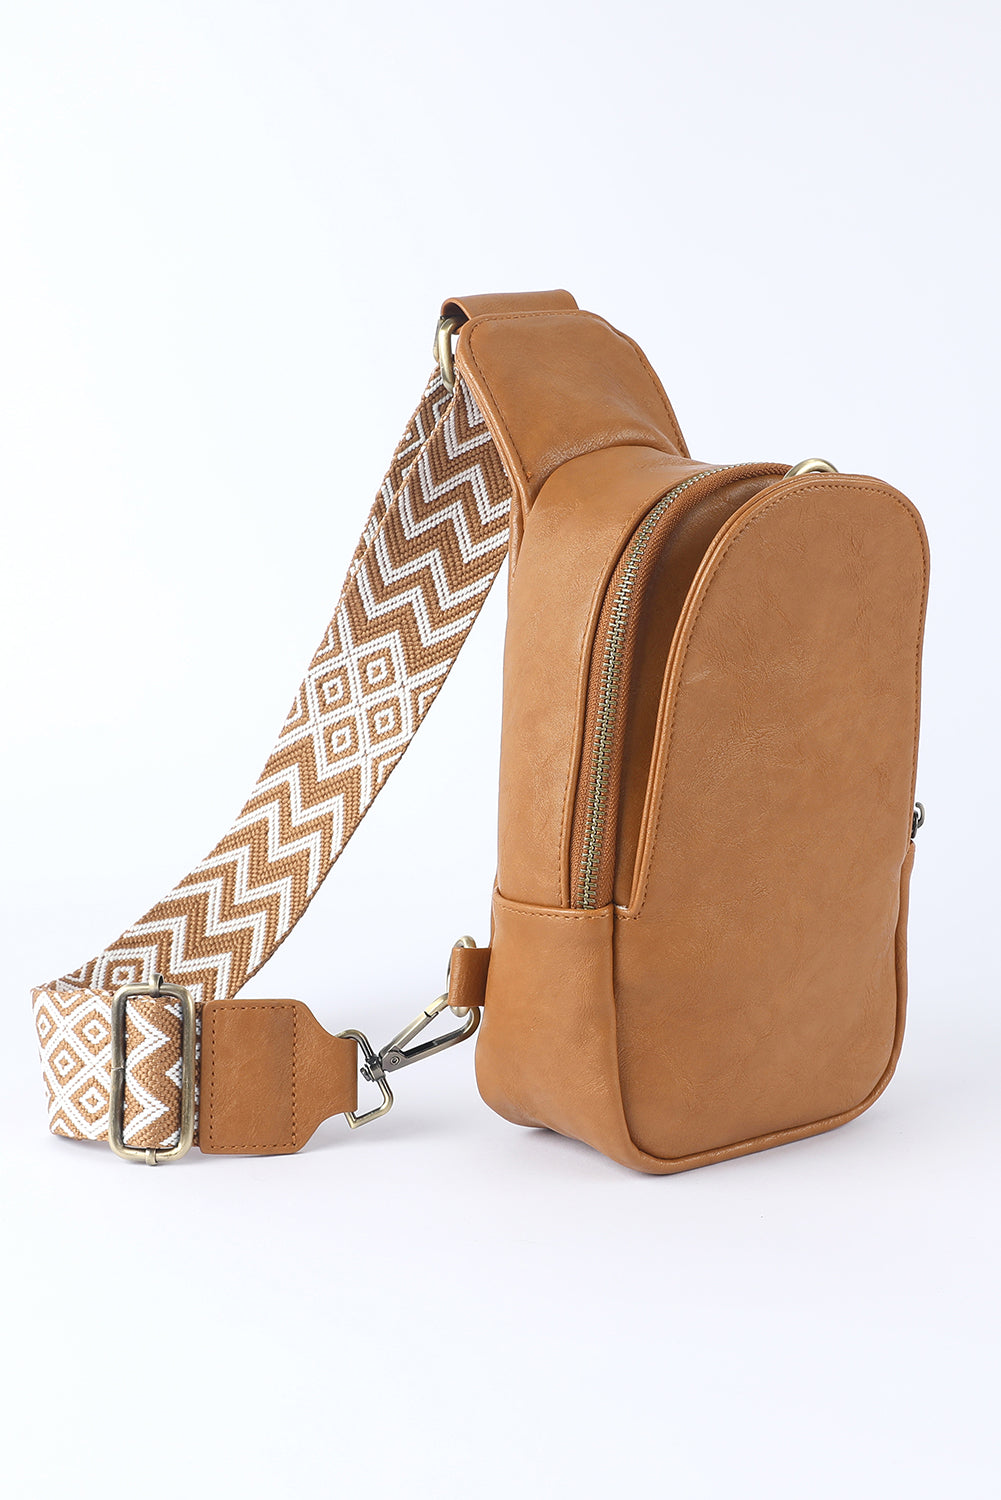 Camel sling bag with camel and white chevron adjustable strap